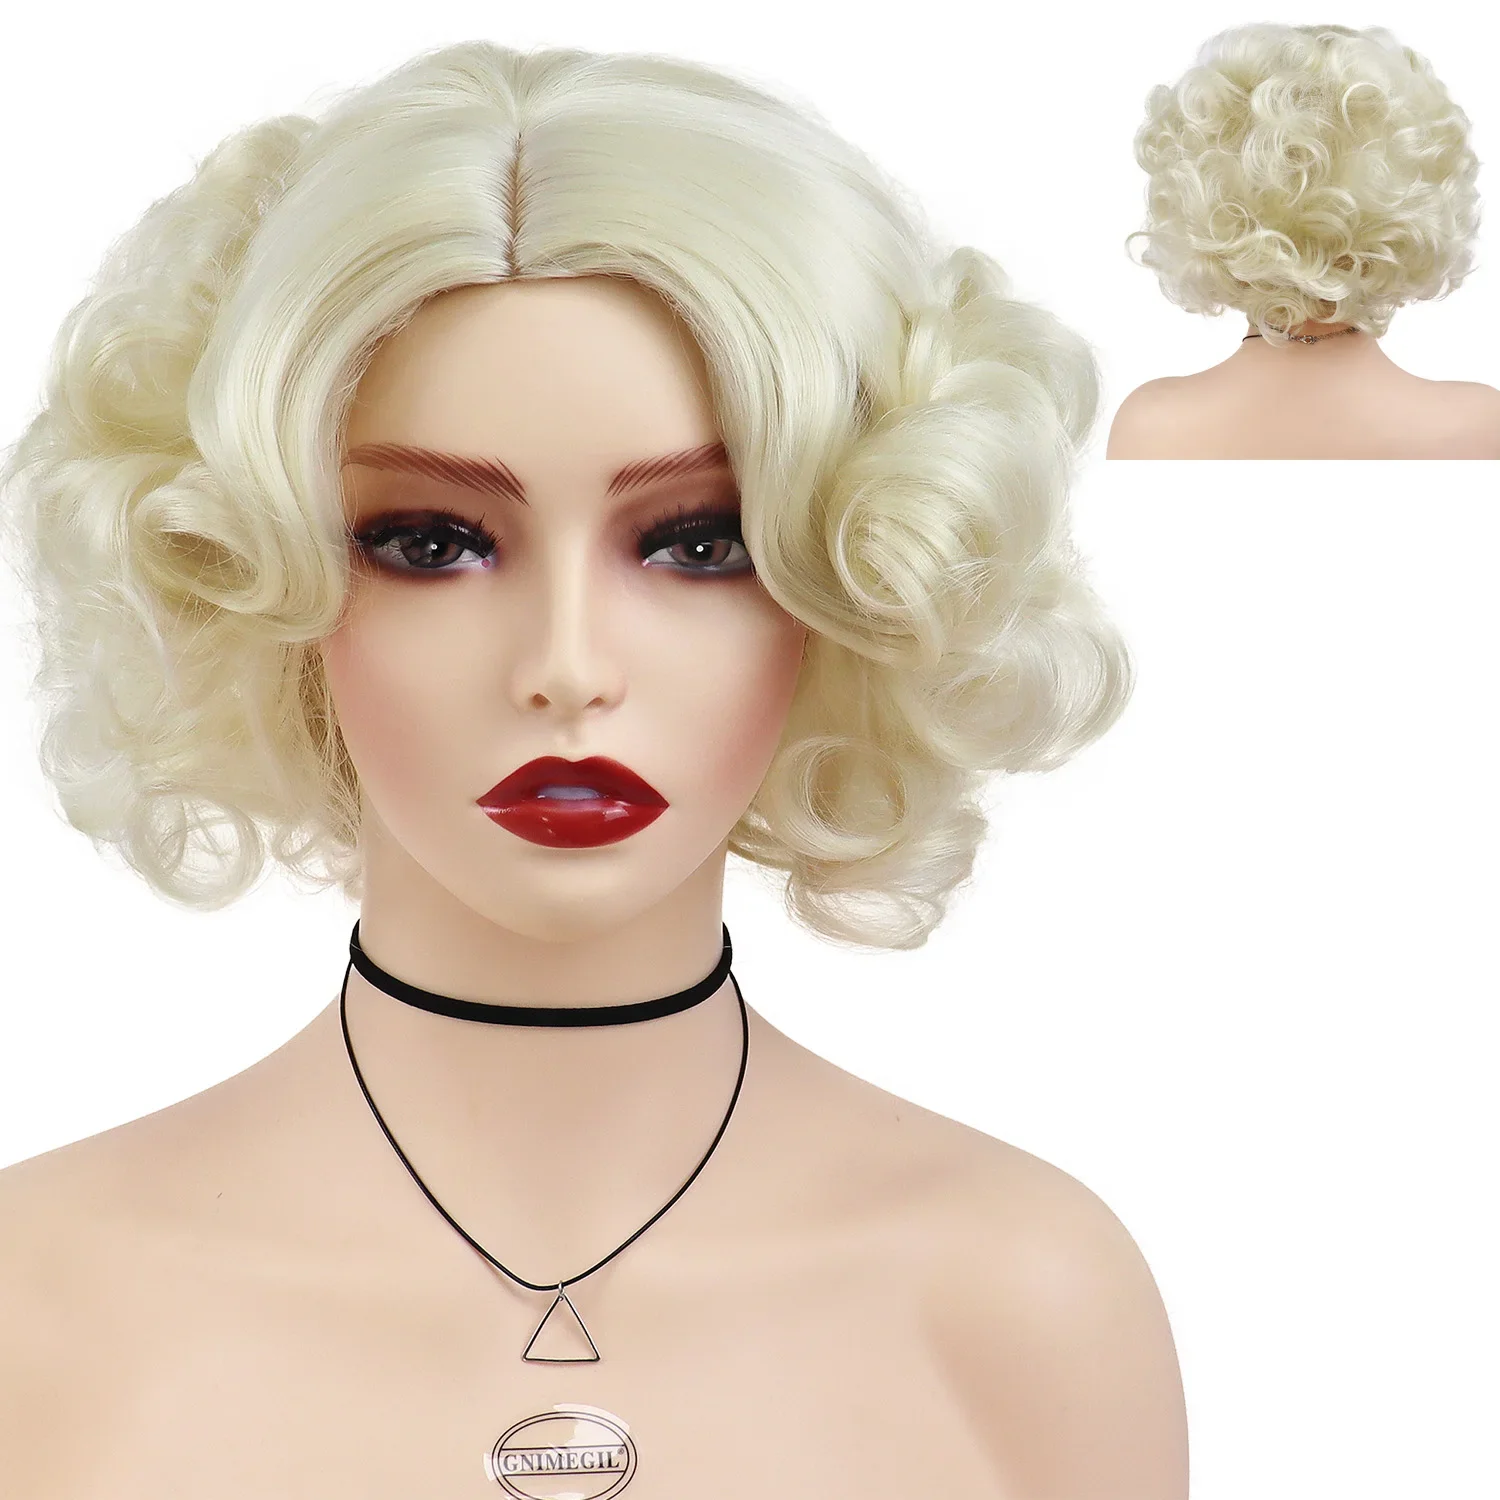 

GNIMEGIL Synthetic Short Curly Hair Blonde Wig Female 1950s Wigs 60s Cosplay Marilyn Monroe Wig Halloween Costume for Women